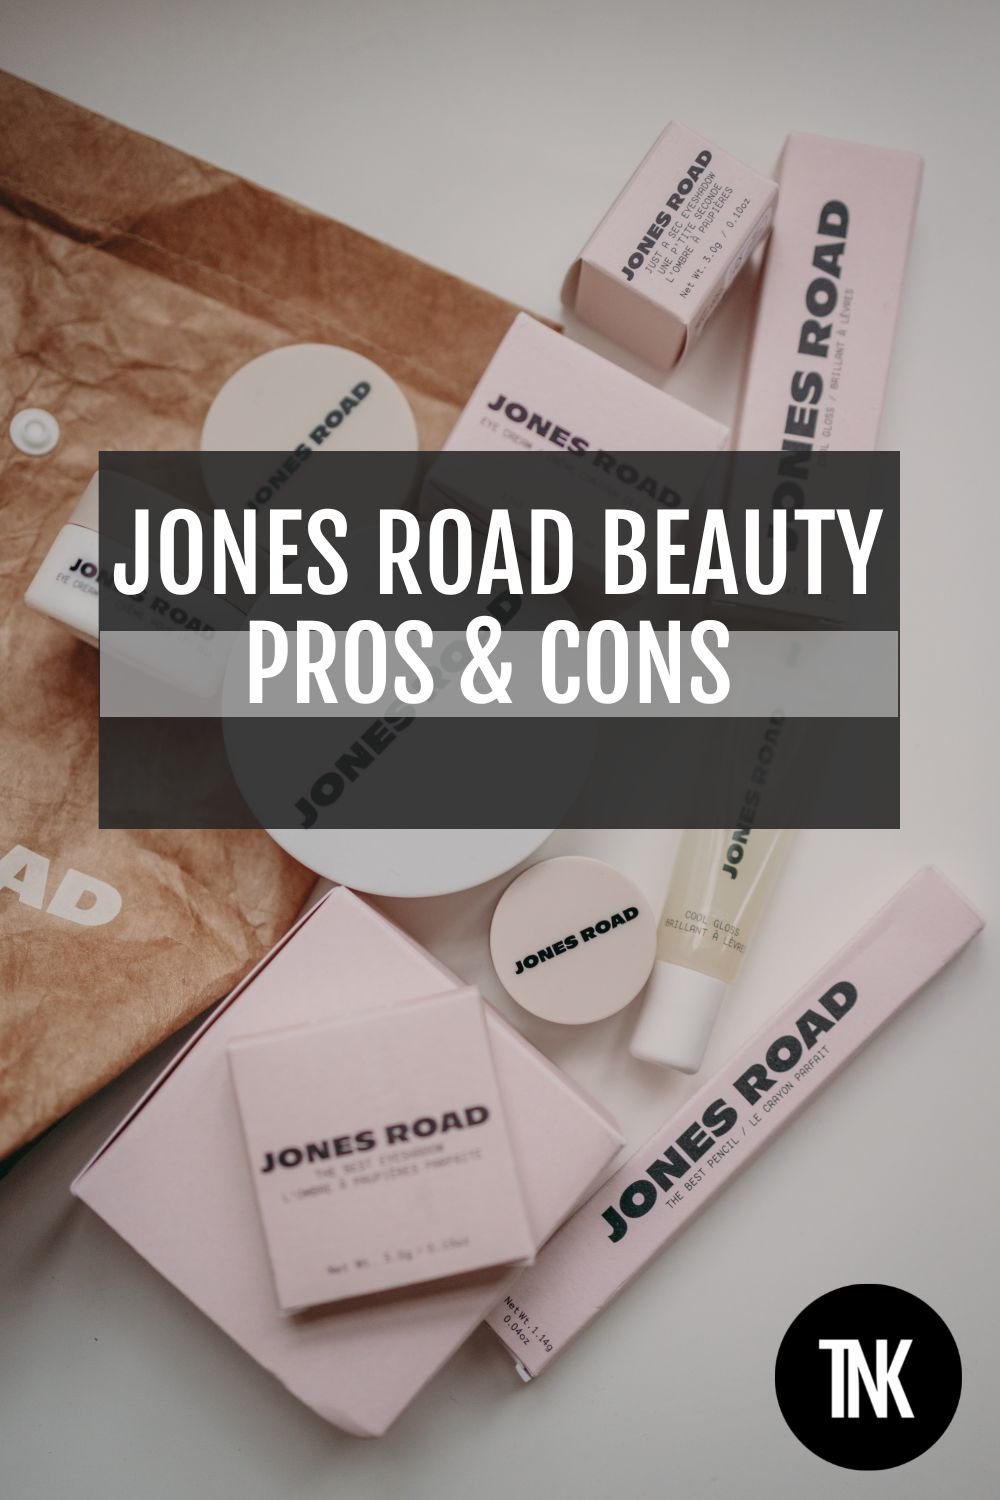 Jones Road Beauty Review (Pros & Cons) The New Knew